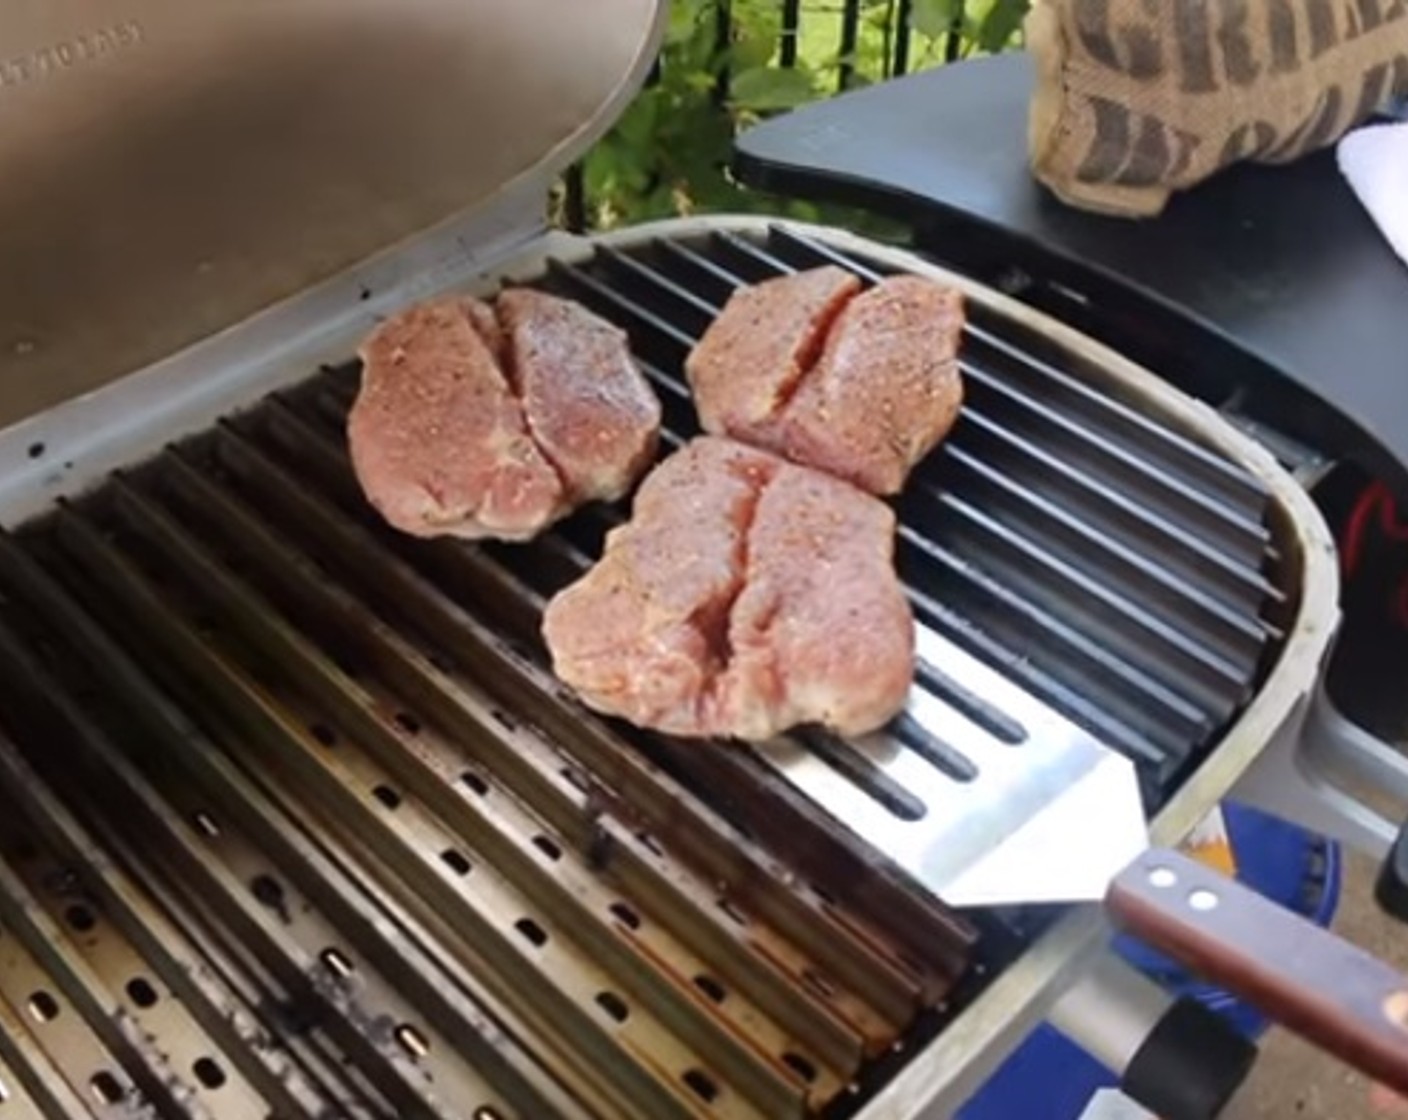 step 7 Flip each chop over and move to the indirect side of the grill. Continue to cook until the internal temperature reaches 130 degrees F (54 degrees C).